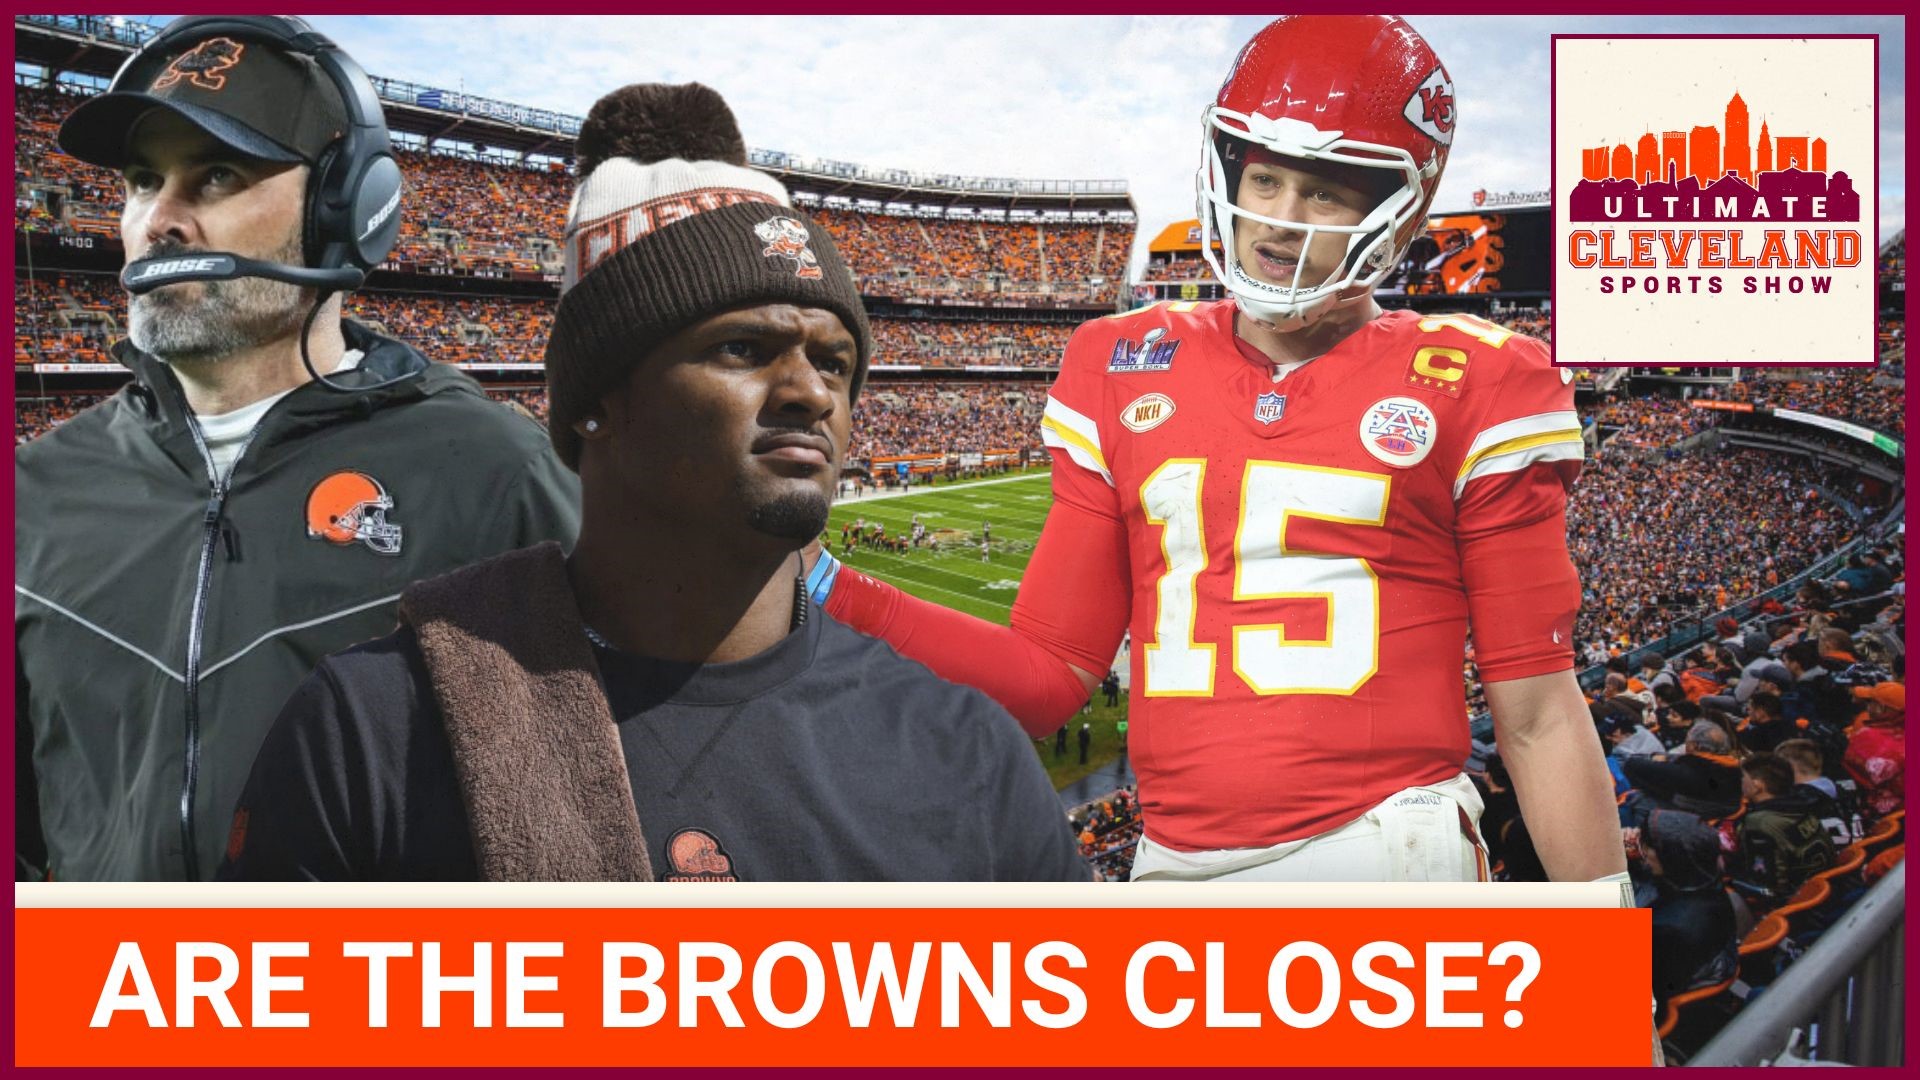 The Cleveland Browns have a lot of work to do in order to get to the level of the Kansas City Chiefs and become AFC Champions.